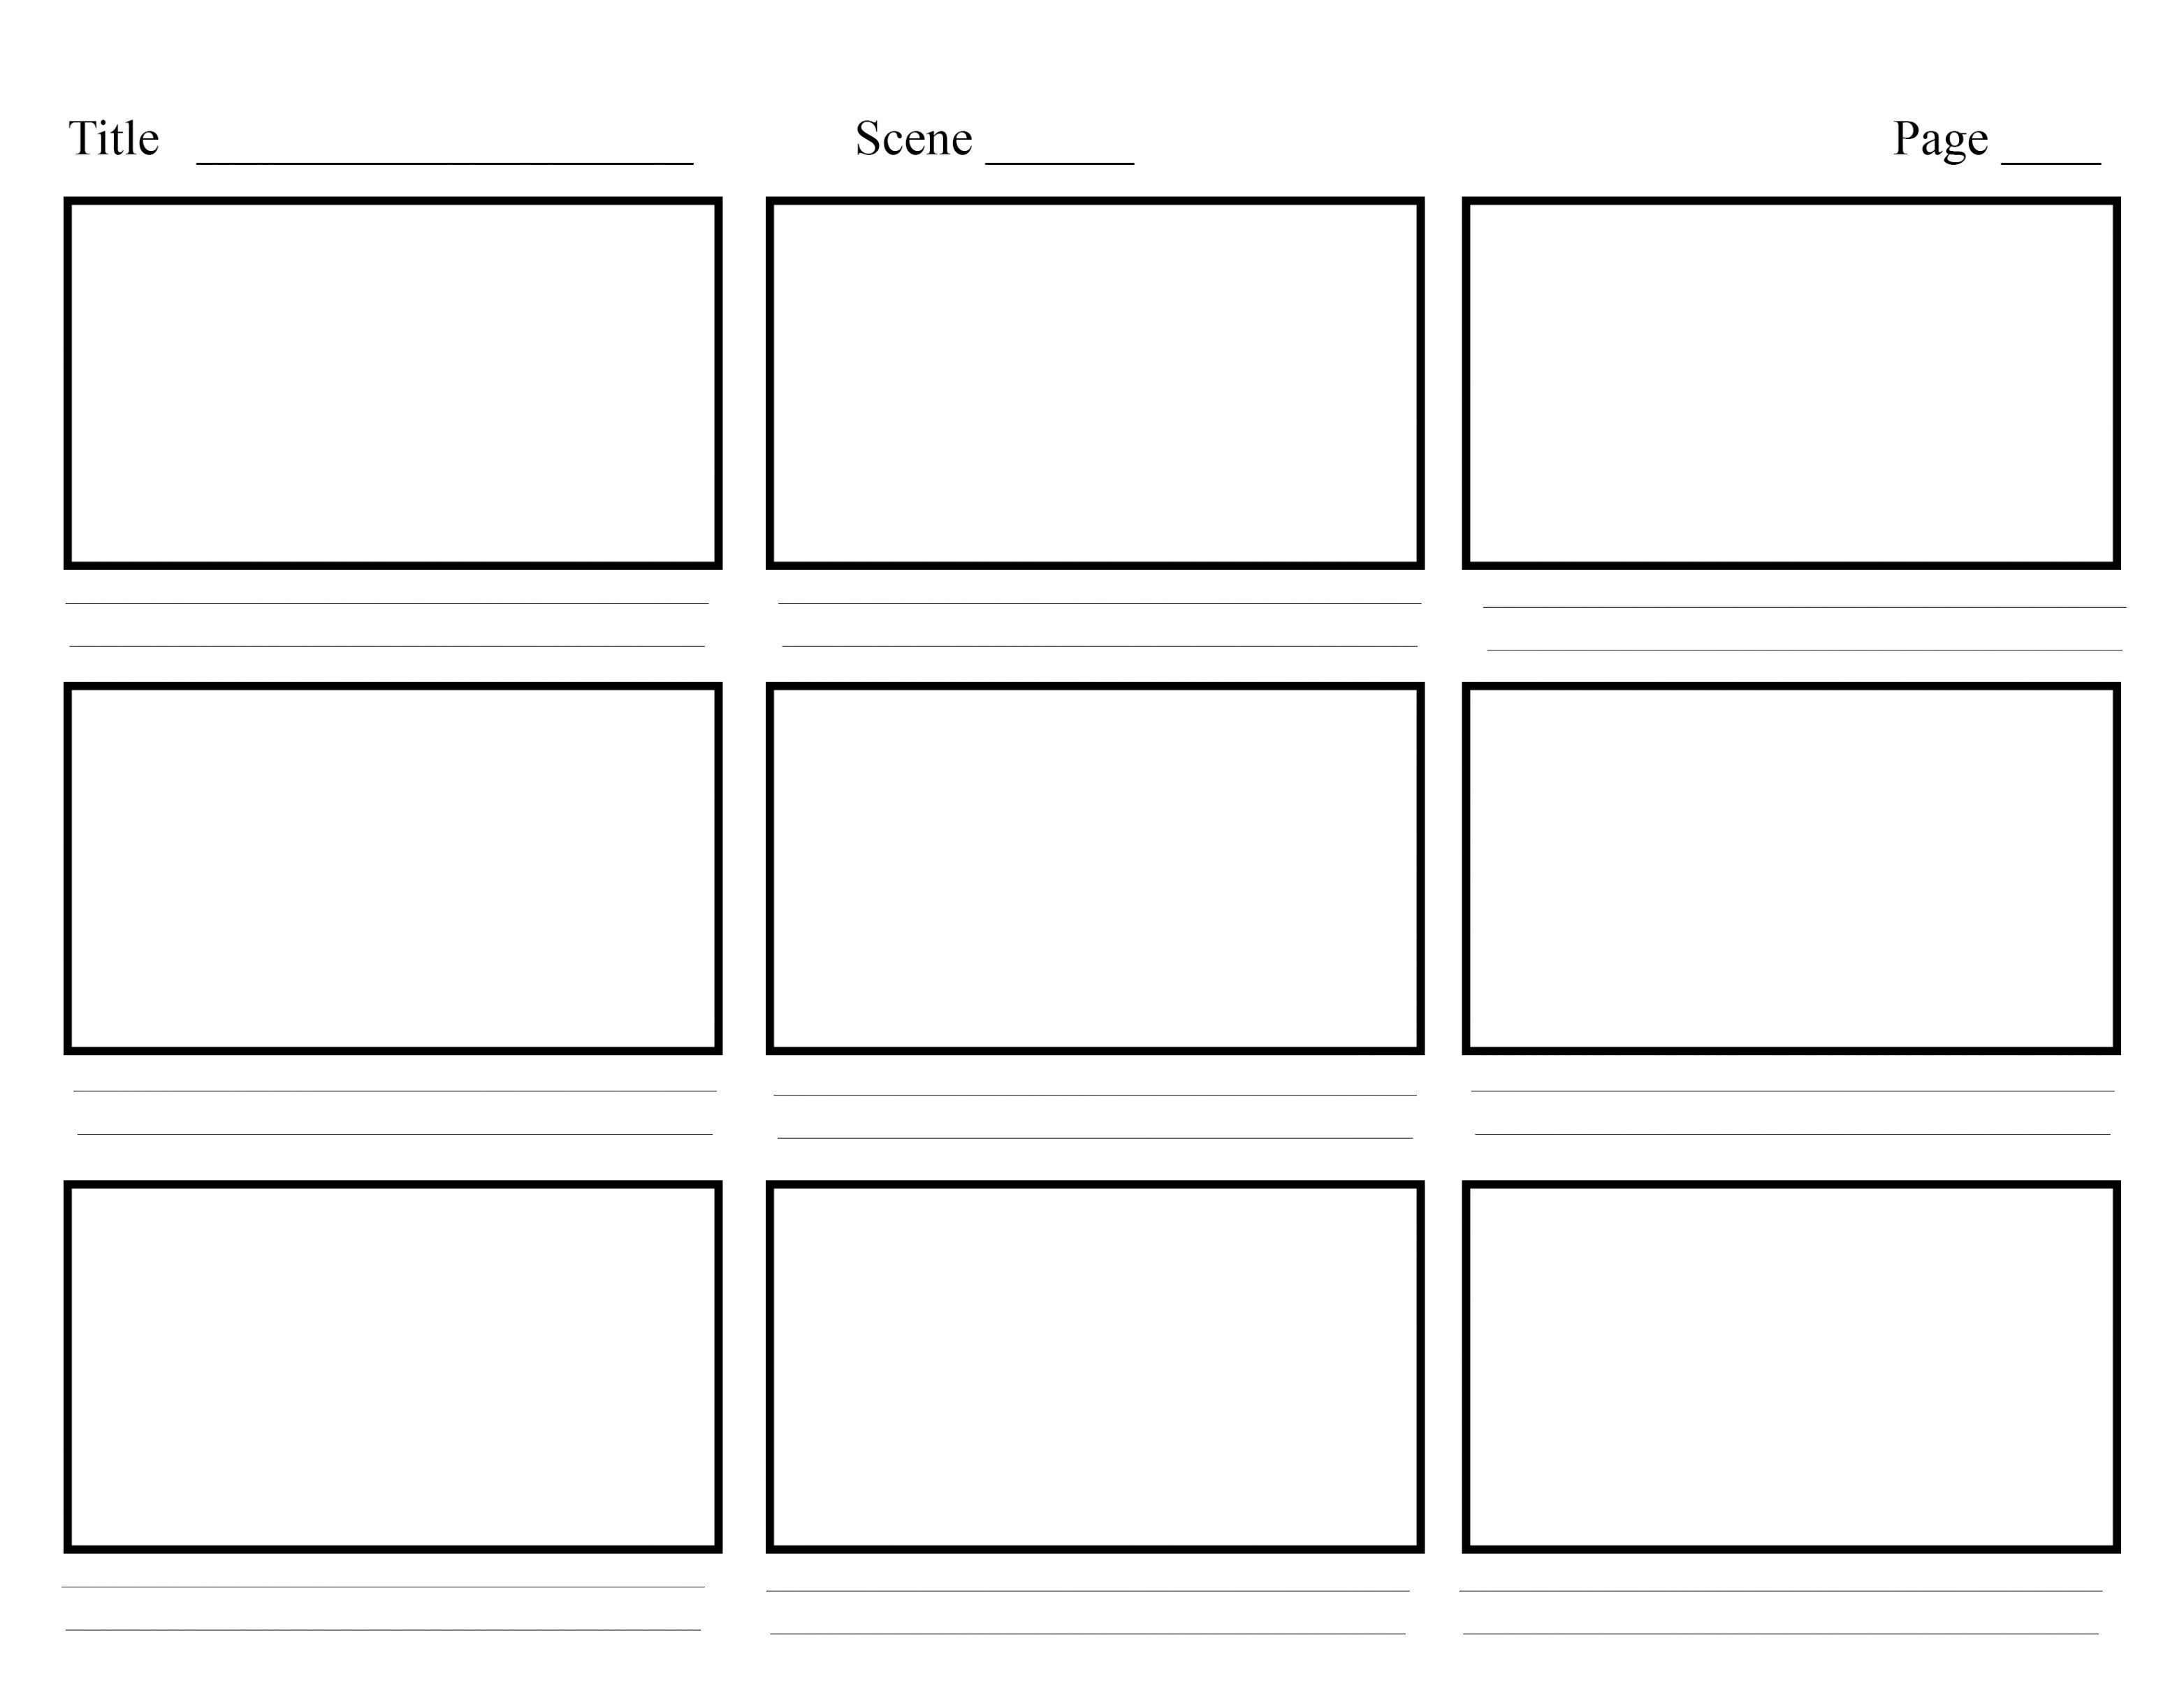 Image Result For Storyboard Template Storyboard Template Video Storyboard Character Design Tips